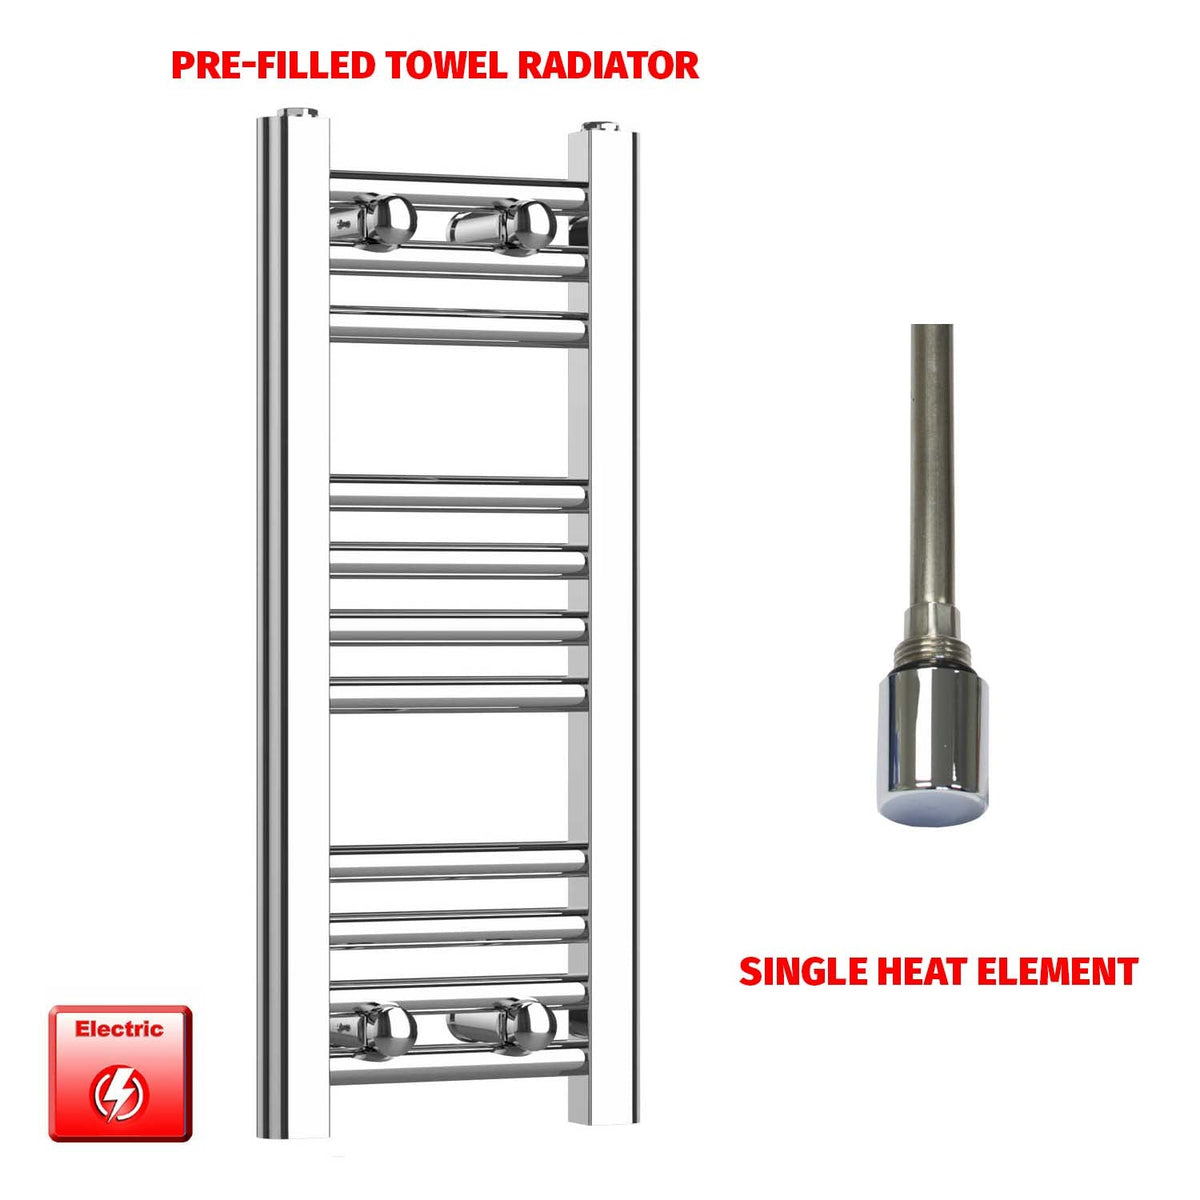 600mm High 200mm Wide Pre-Filled Electric Heated Towel Rail Radiator Straight Chrome Single Heat Element Single No Timer